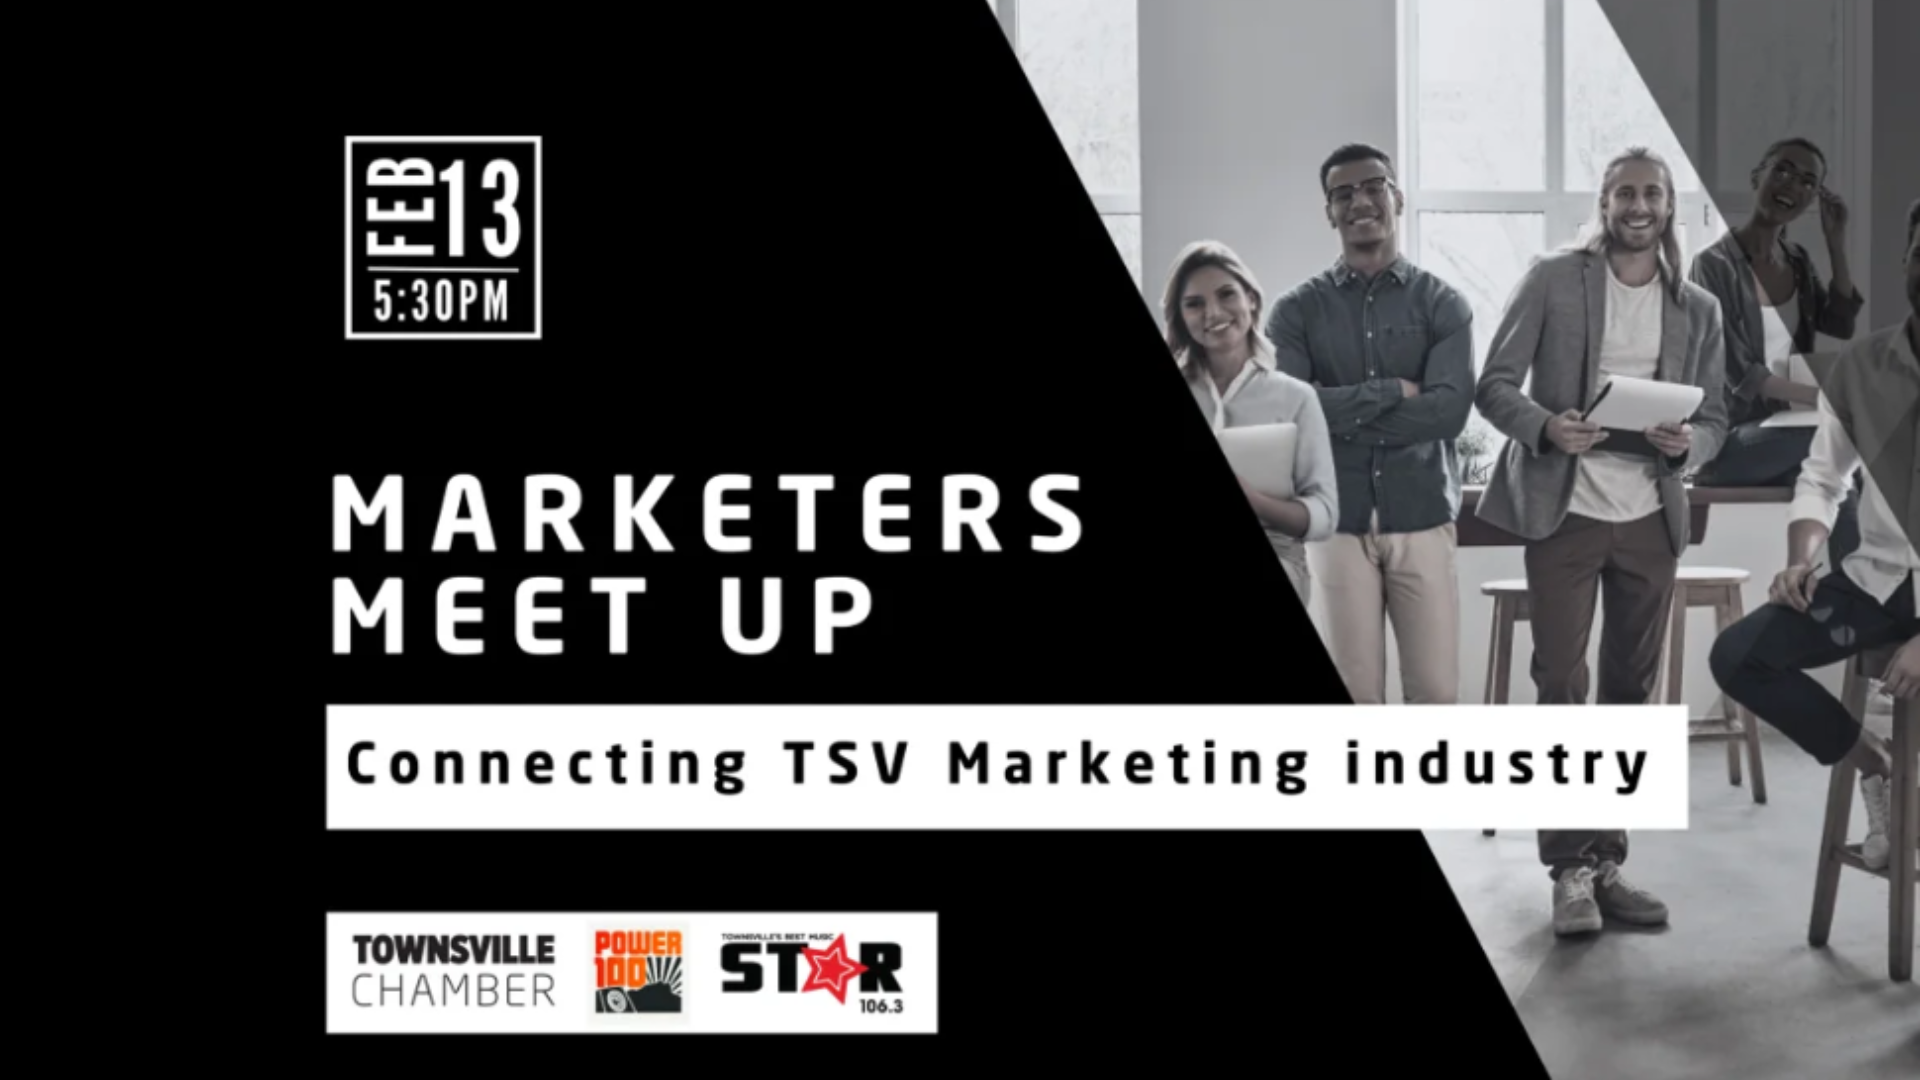 Marketers Meet Up - Townsville Chamber of Commerce and Radio Townsville. BDmag business events